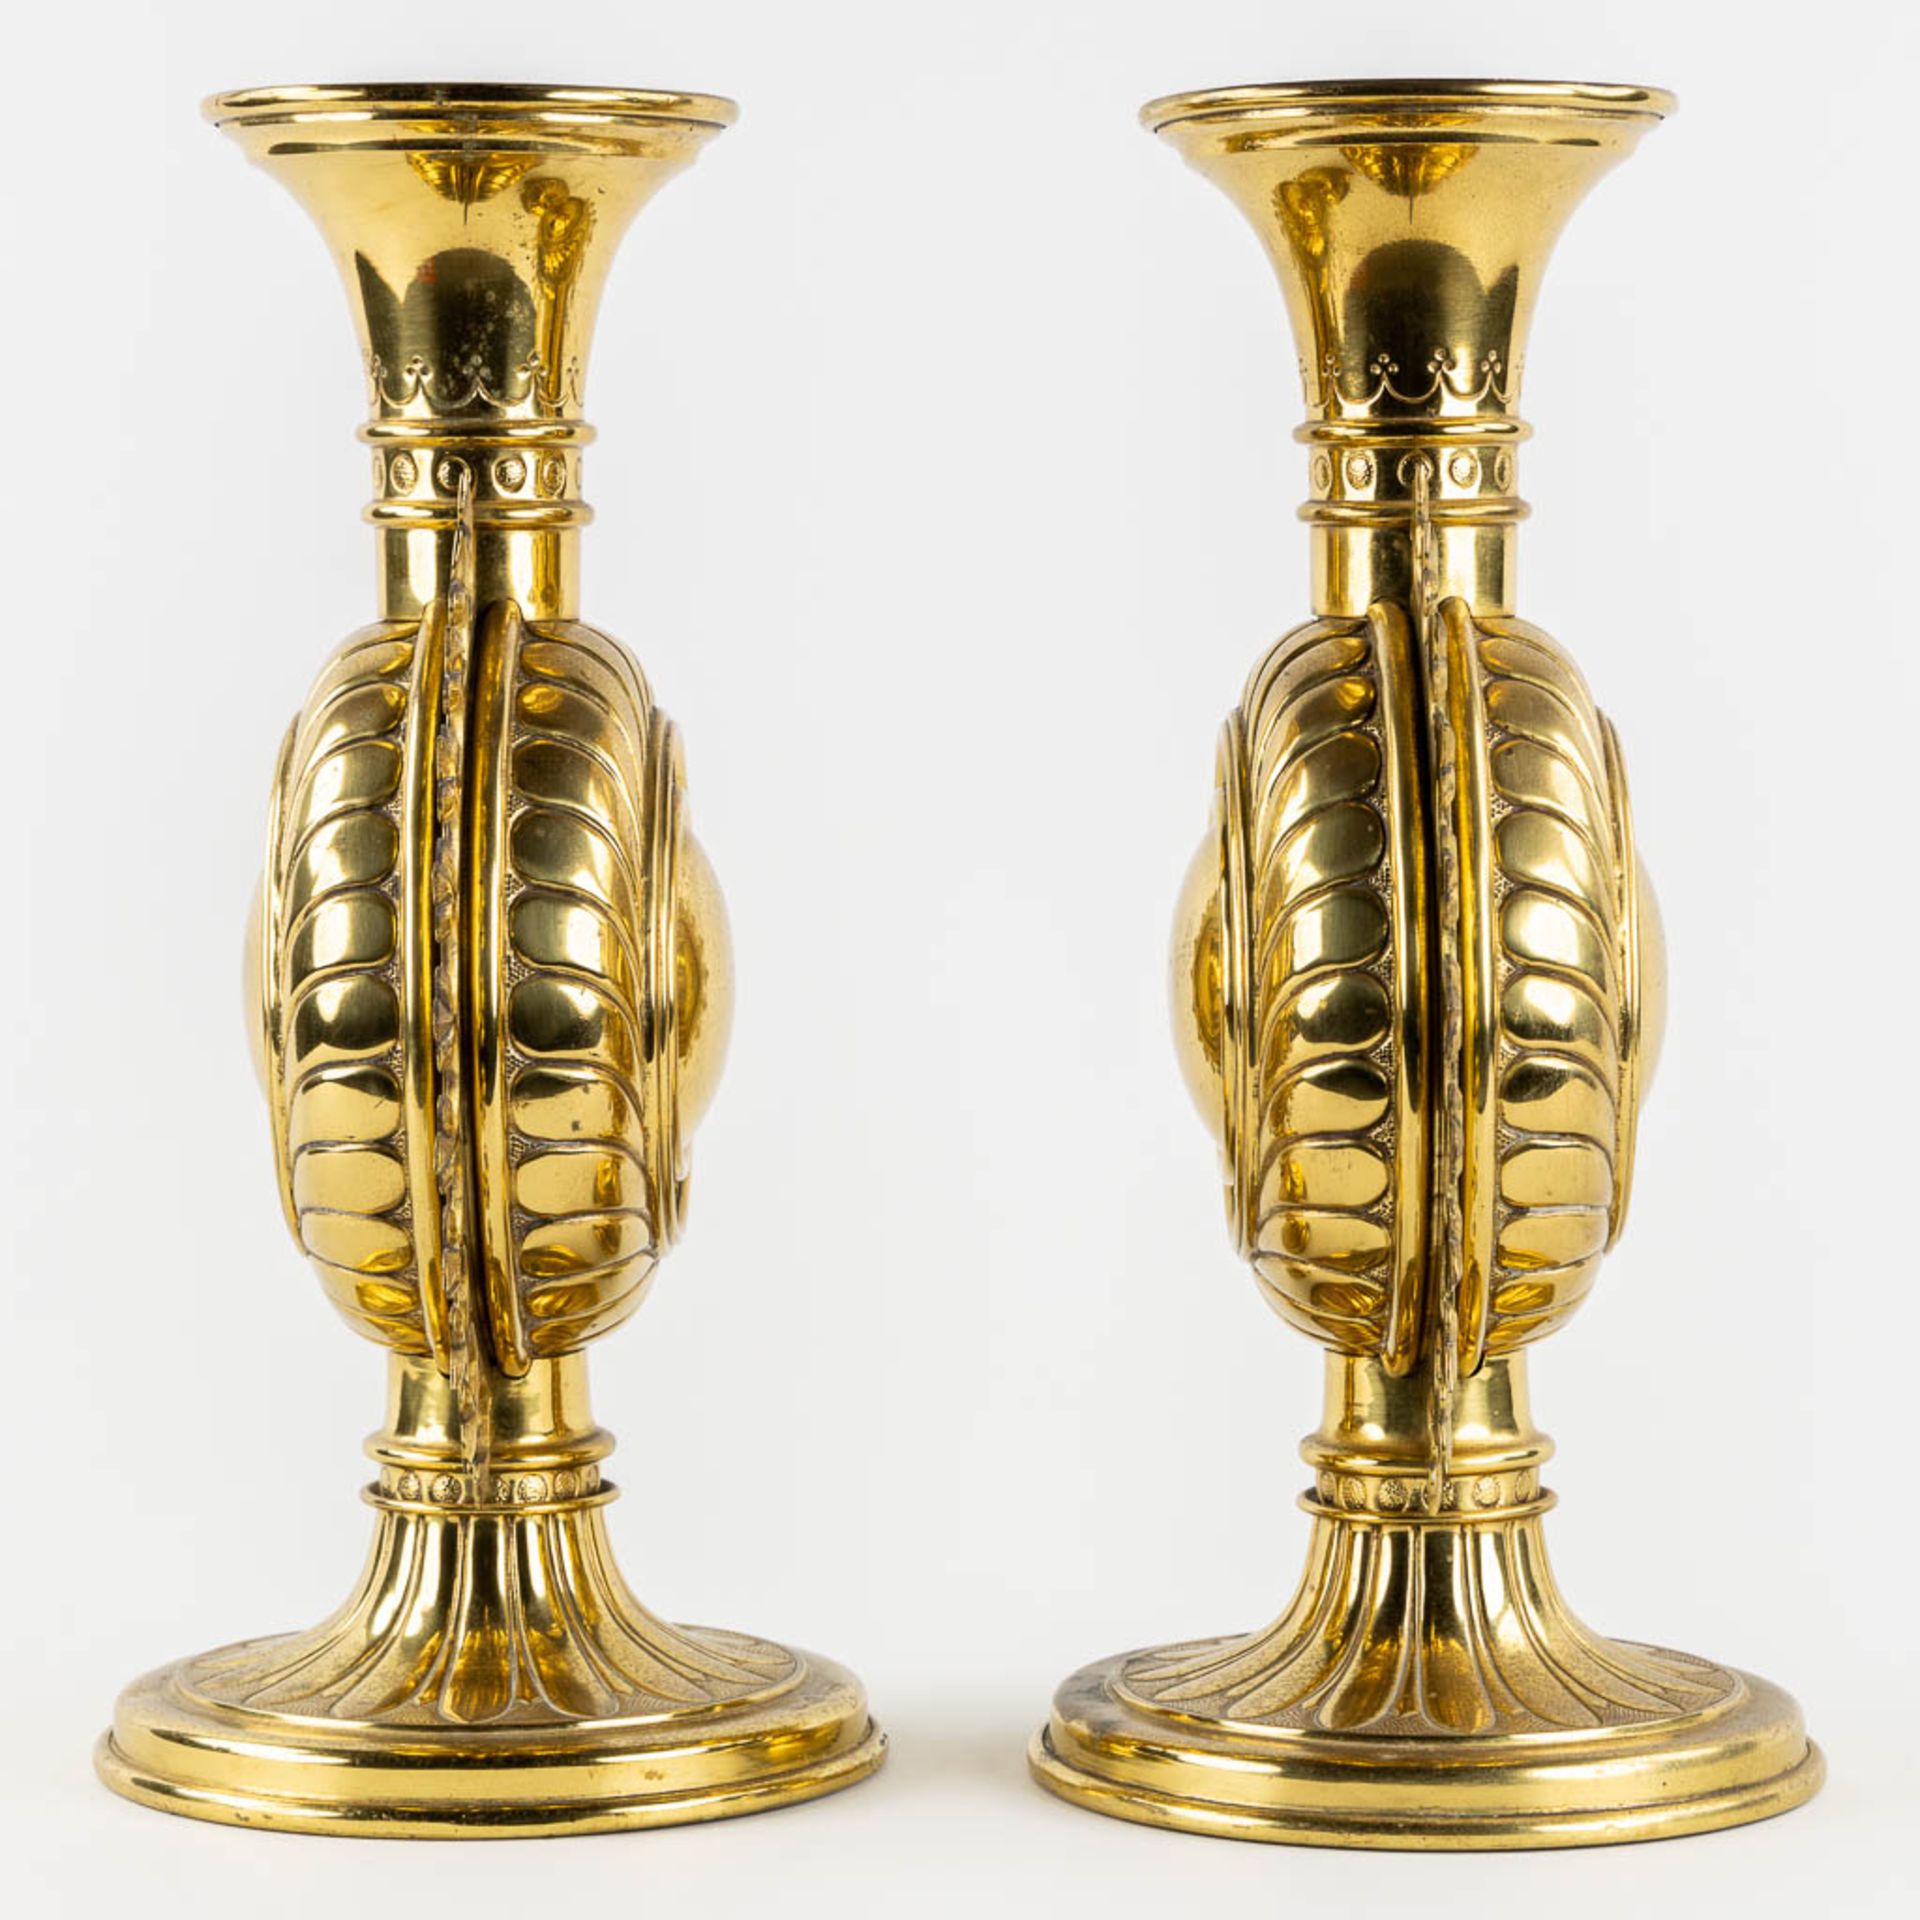 A pair of candelabra, brass, gothic Revival. (L:21 x W:27 x H:42 cm) - Image 4 of 11